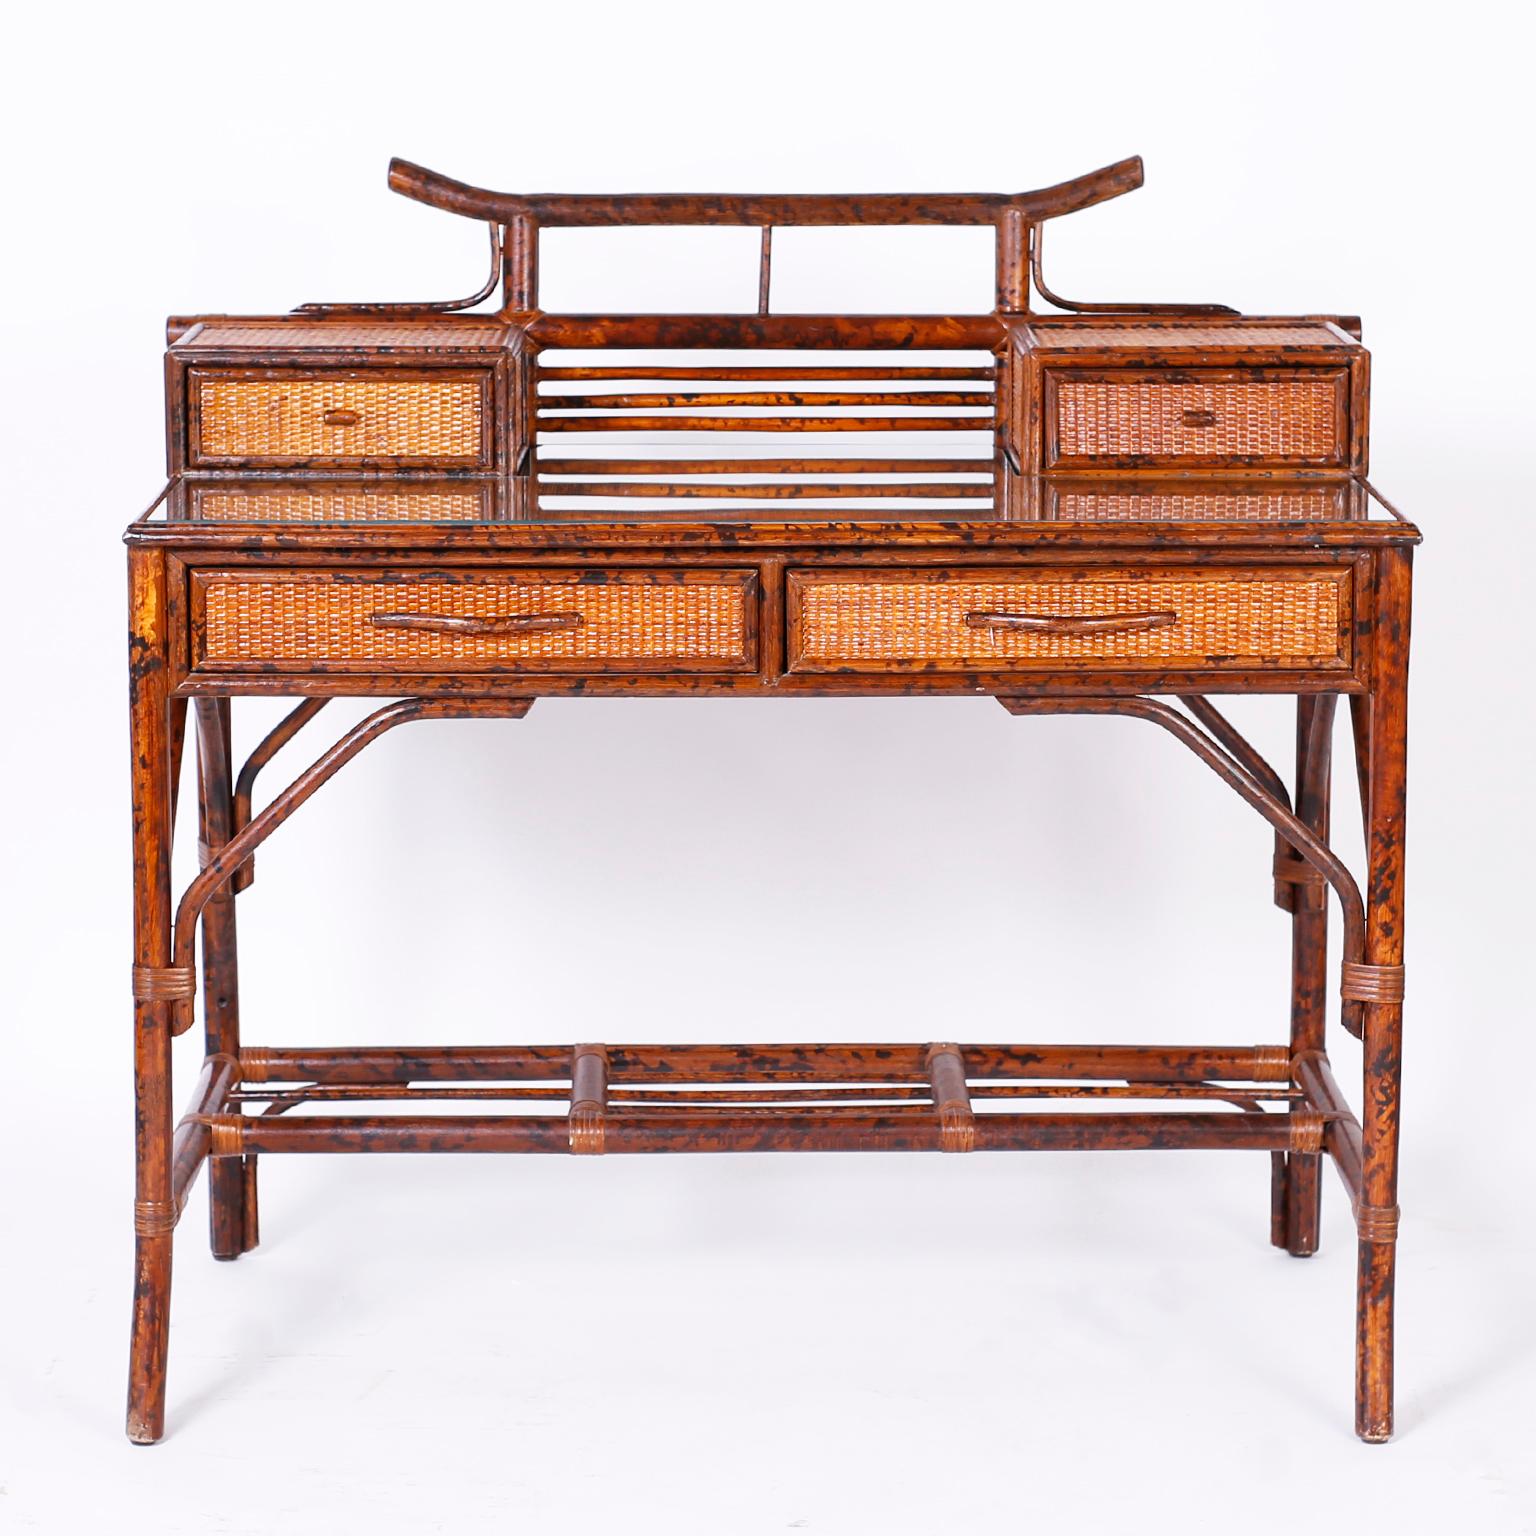 British Colonial Faux Bamboo and Grasscloth Desk and Chair